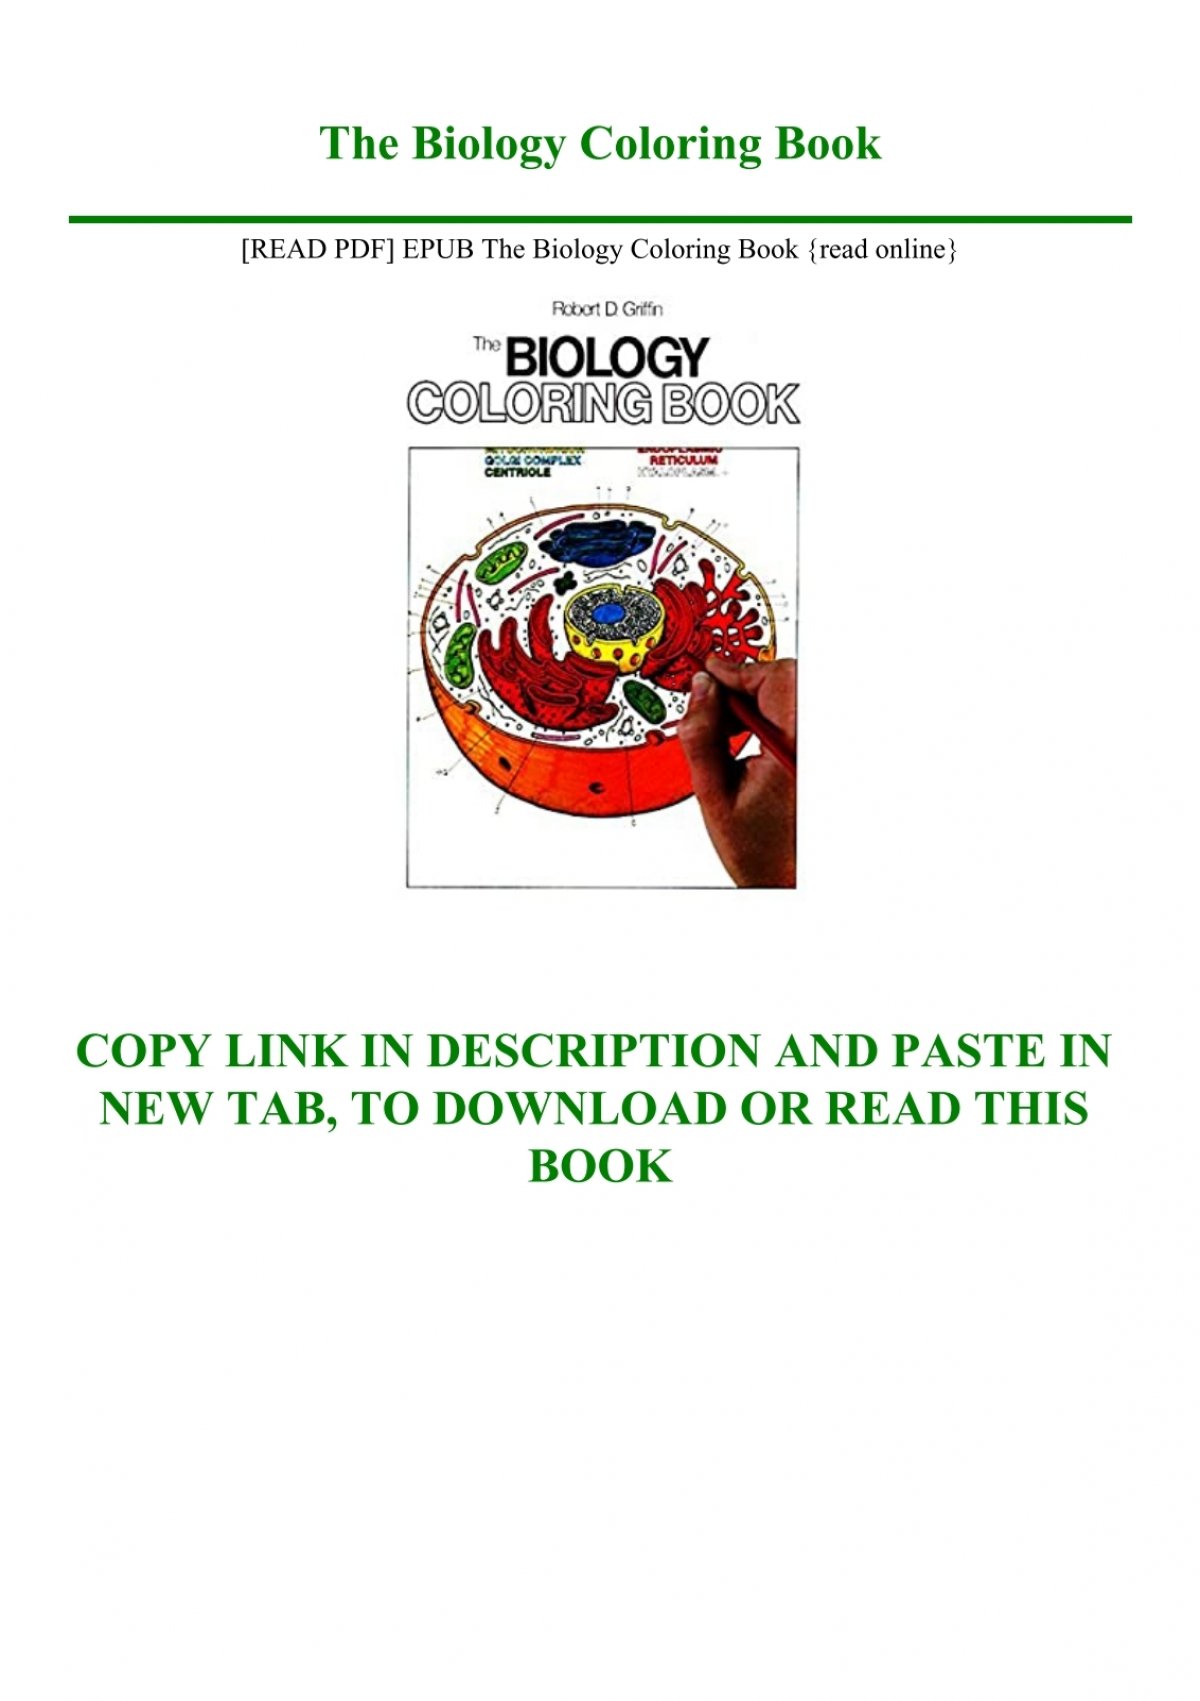 Download Read Pdf Epub The Biology Coloring Book Read Online